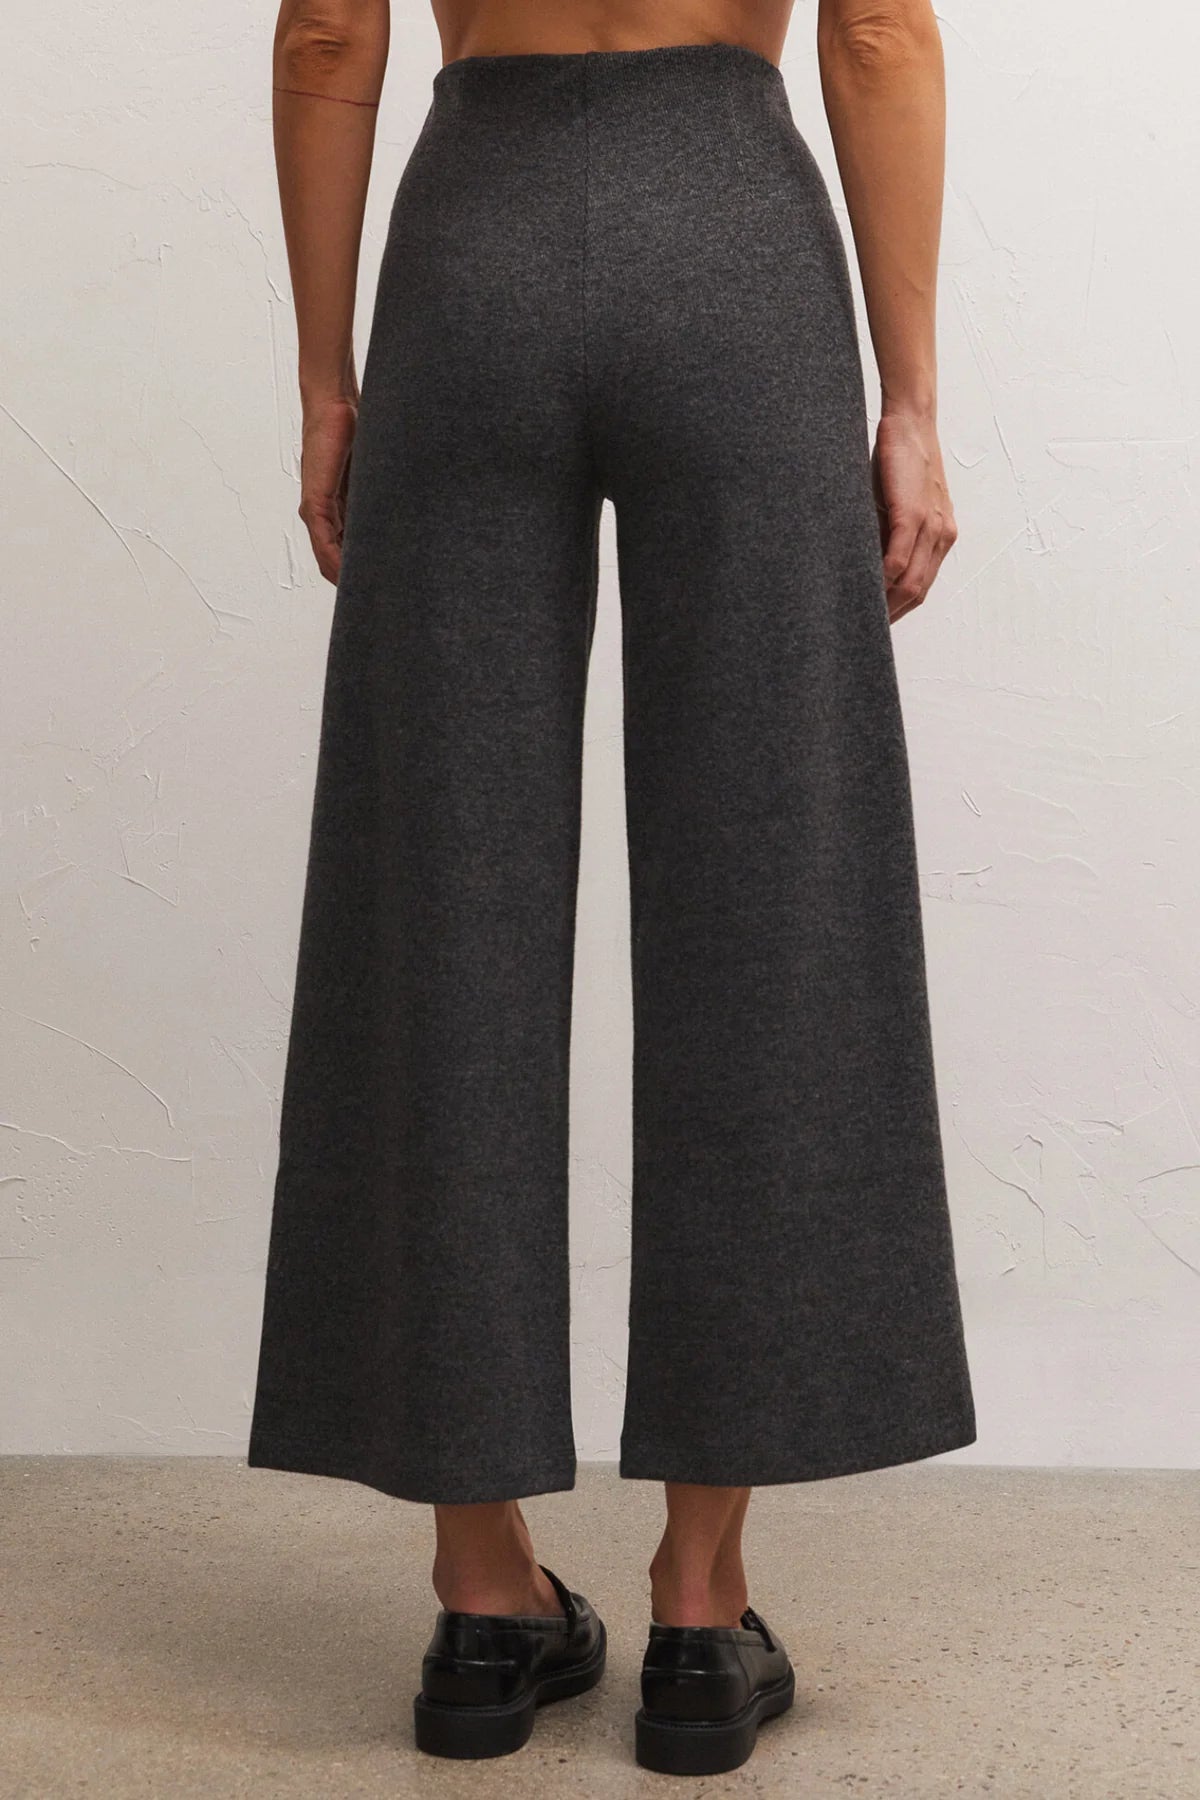 Delaney Brushed Rib Pant in Charcoal Heather